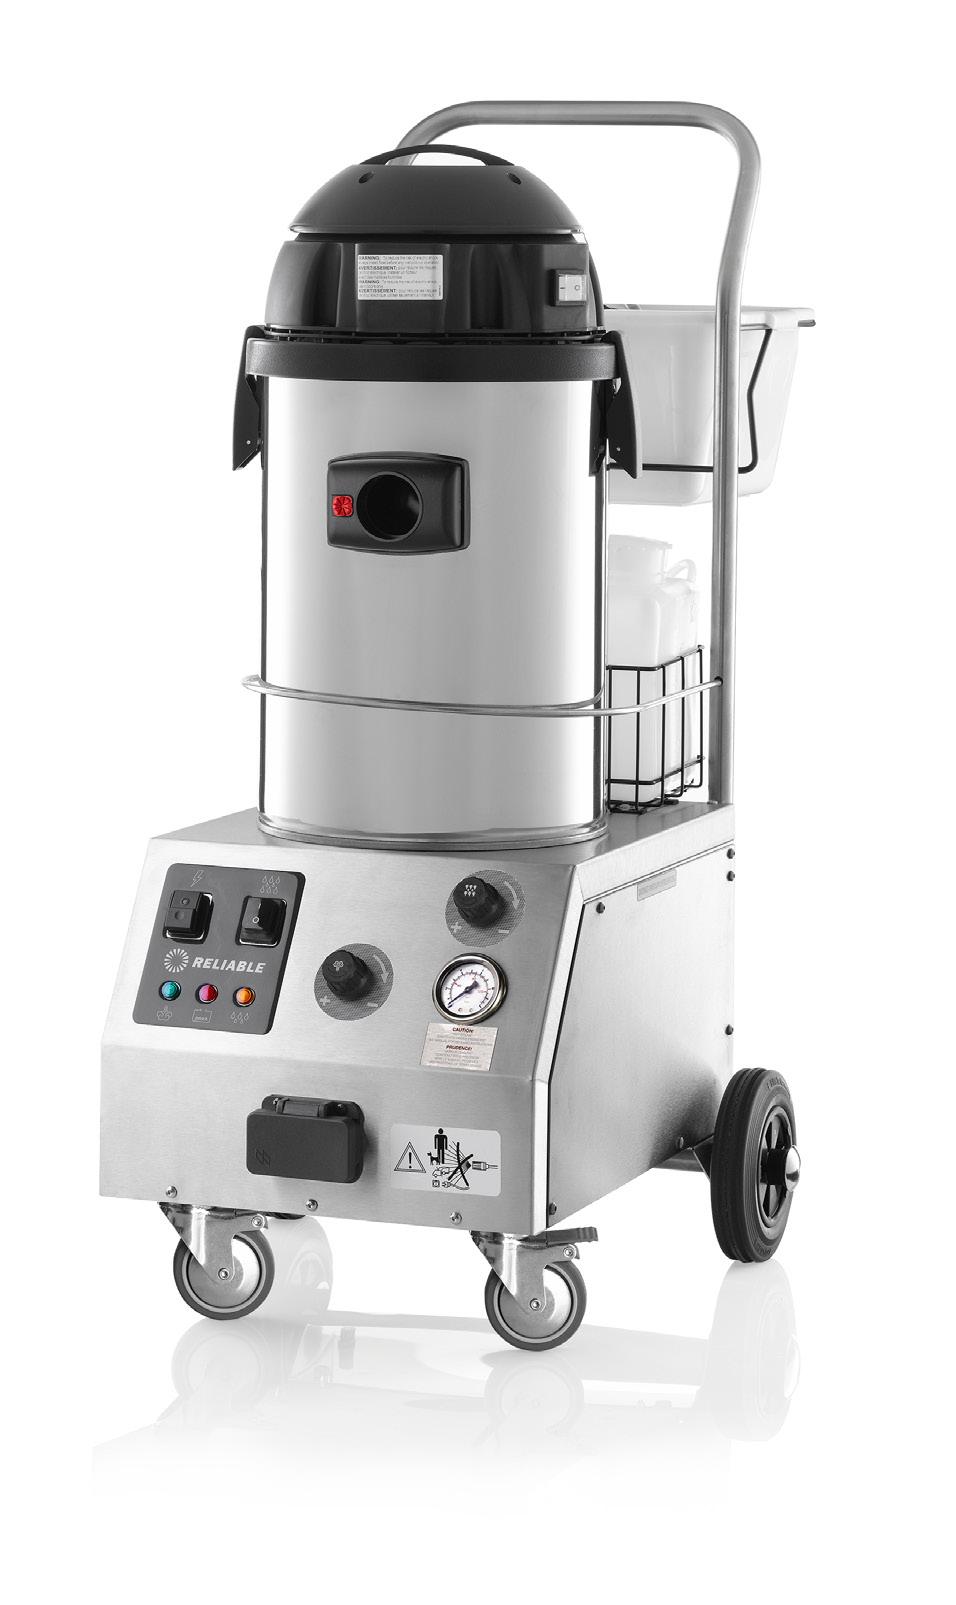 TANDEM PRO 2000CV COMMERCIAL STEAM CLEANER WITH CSS AND WET & DRY VACUUM CLEANER TOUGH AS NAILS The Tandem Pro is a multi-use cleaning unit.